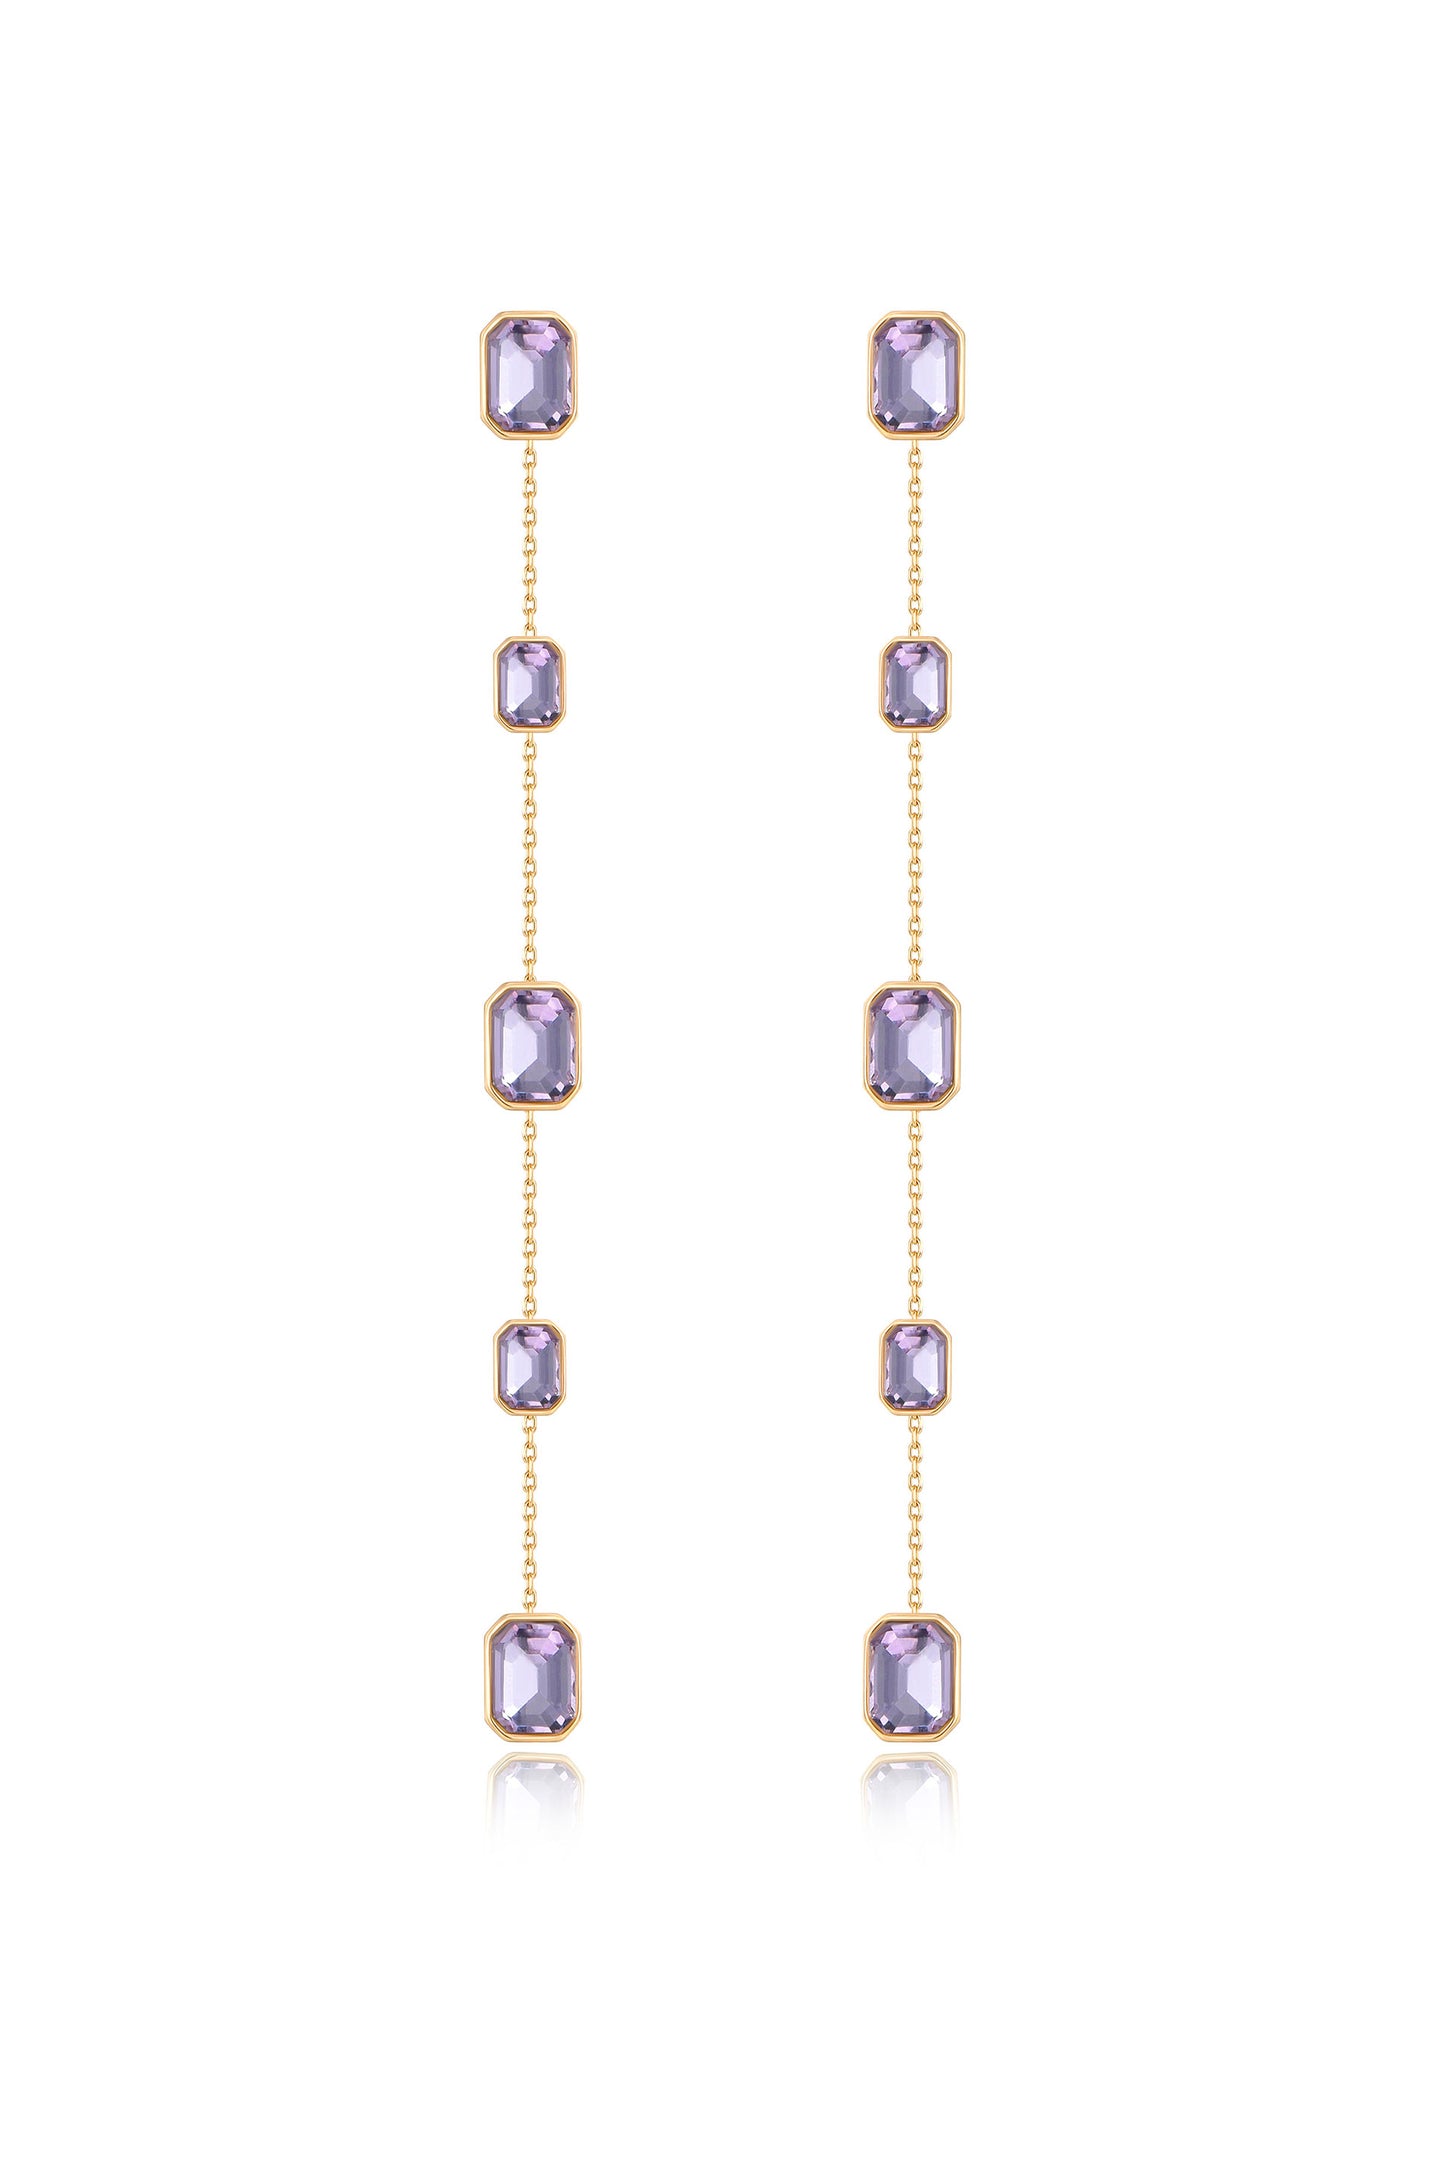 Iconic Crystal Dangle Earrings in light amethyst crystals